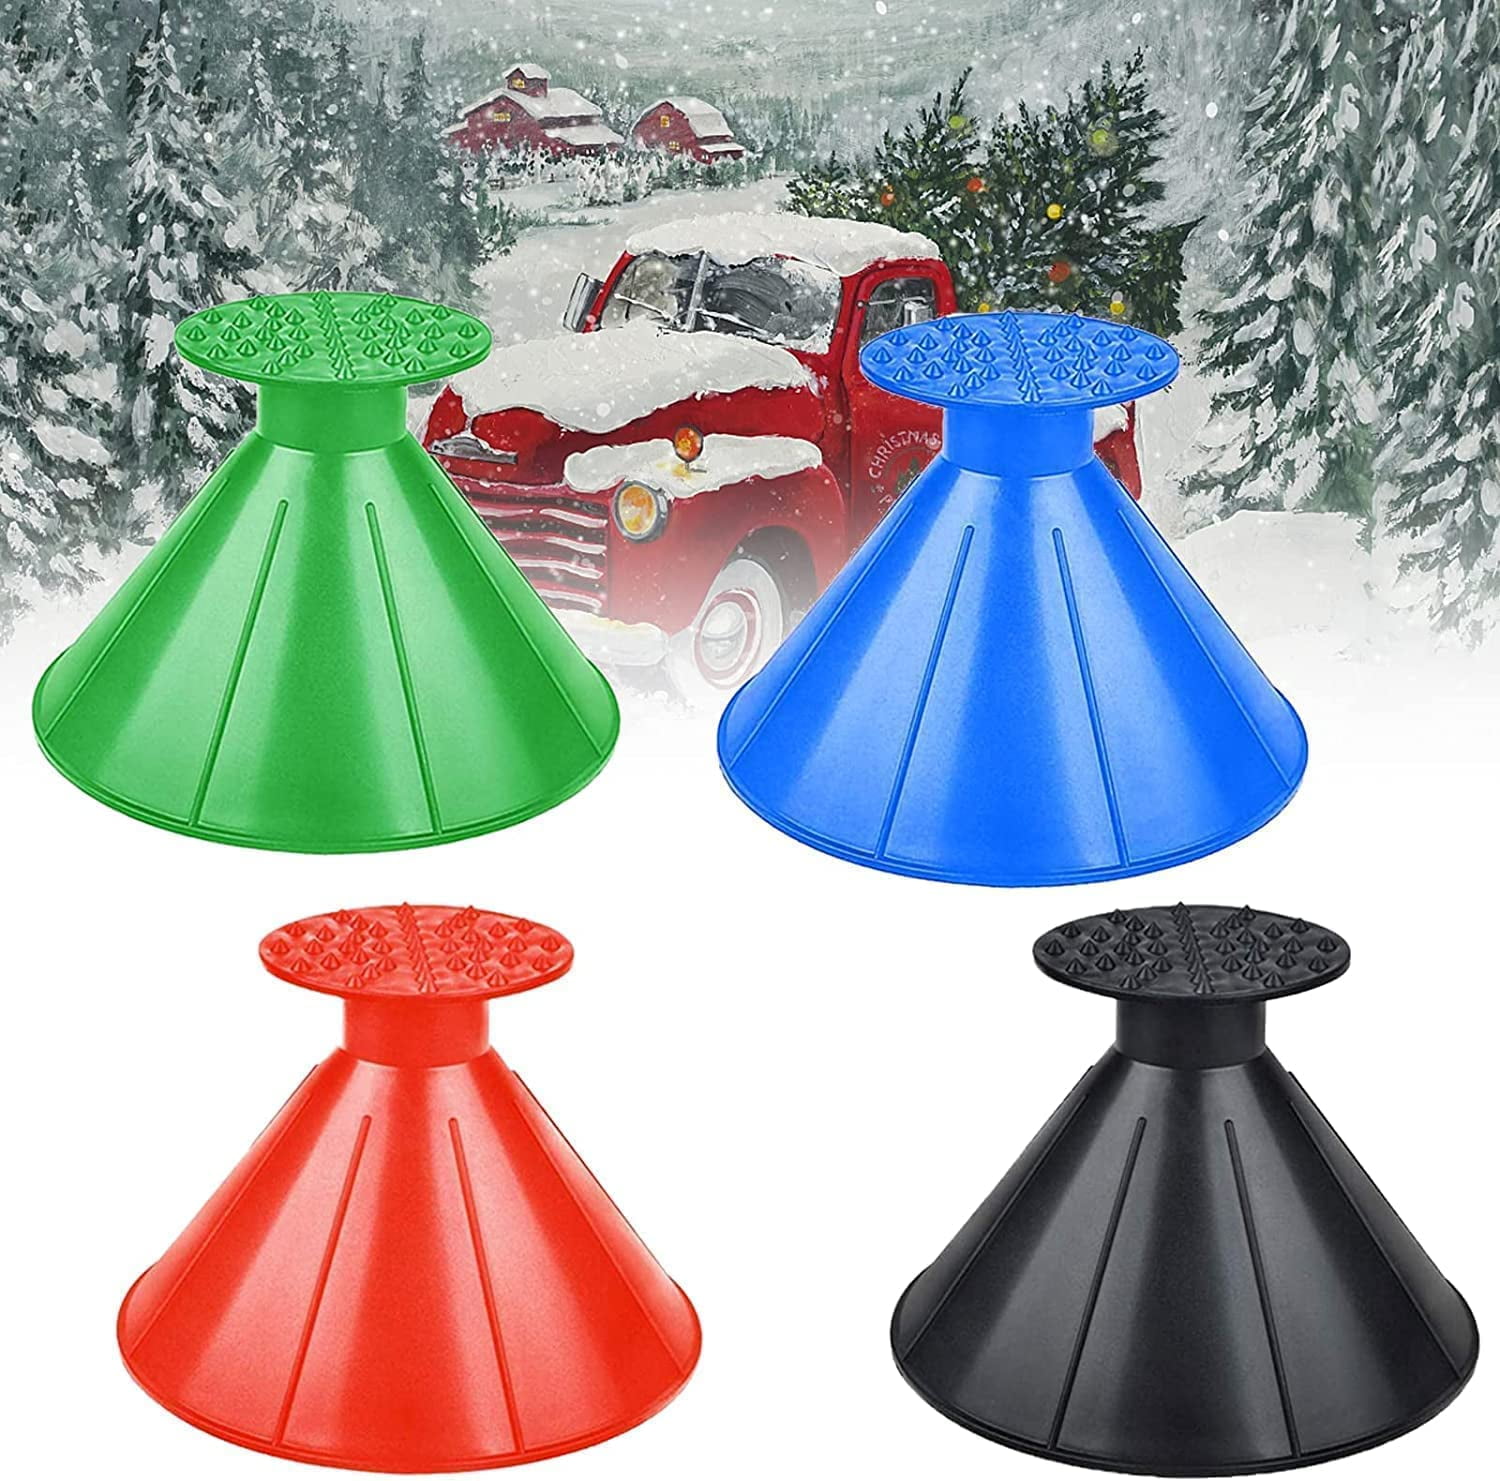 DuyaJoinX 4 Colors Magical Ice Scrapers for Car Windshield, Snow Scraper  Round with Funnel, Cone-Shaped Car Snow Remover, Car Window Cleaner for Ice  